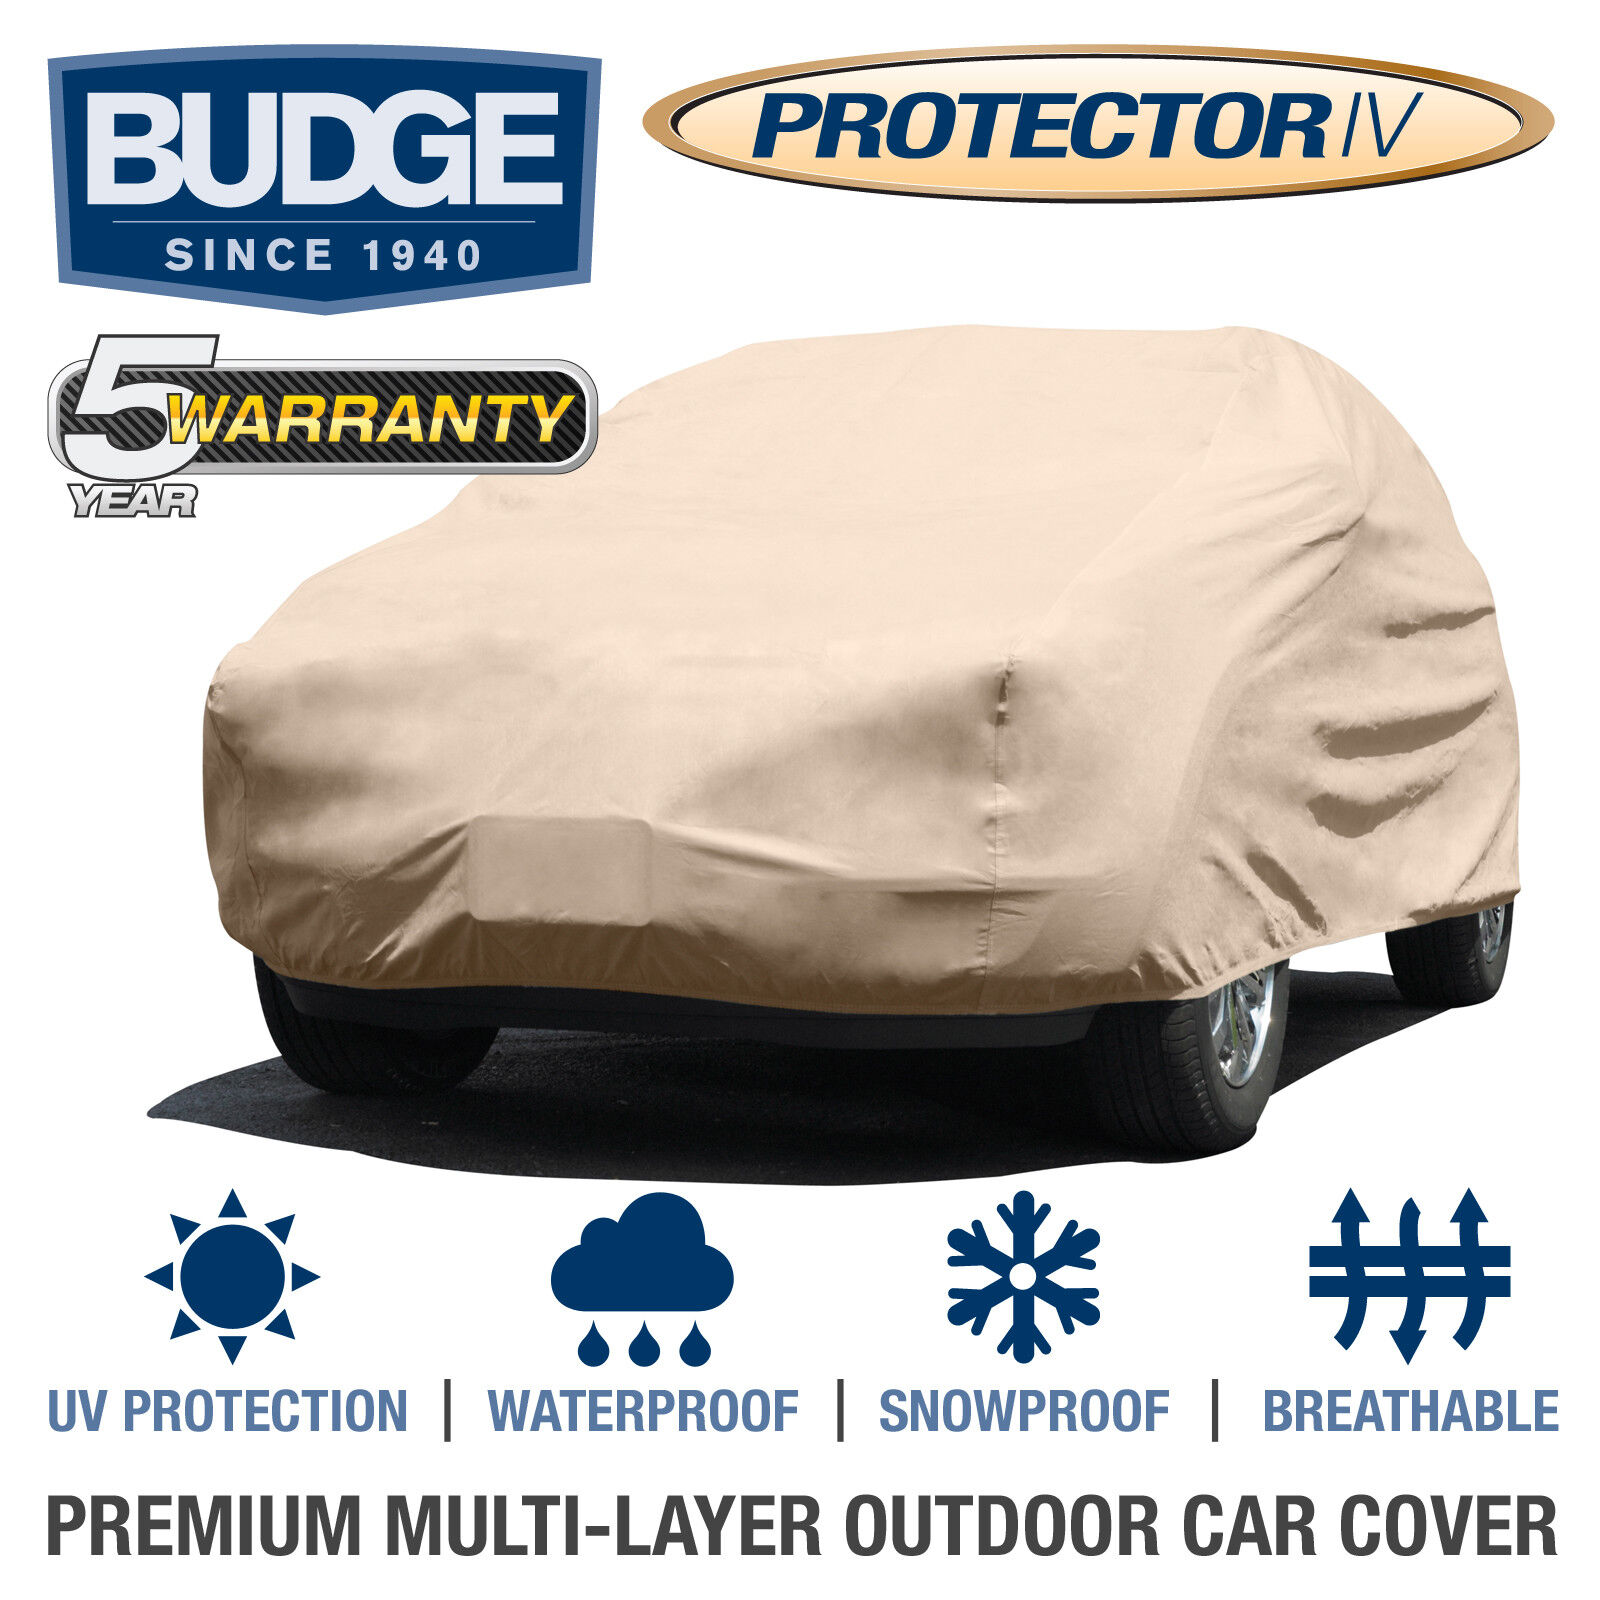 Budge Protector IV SUV Cover Fits Nissan Armada 2006 | Waterproof | Breathable